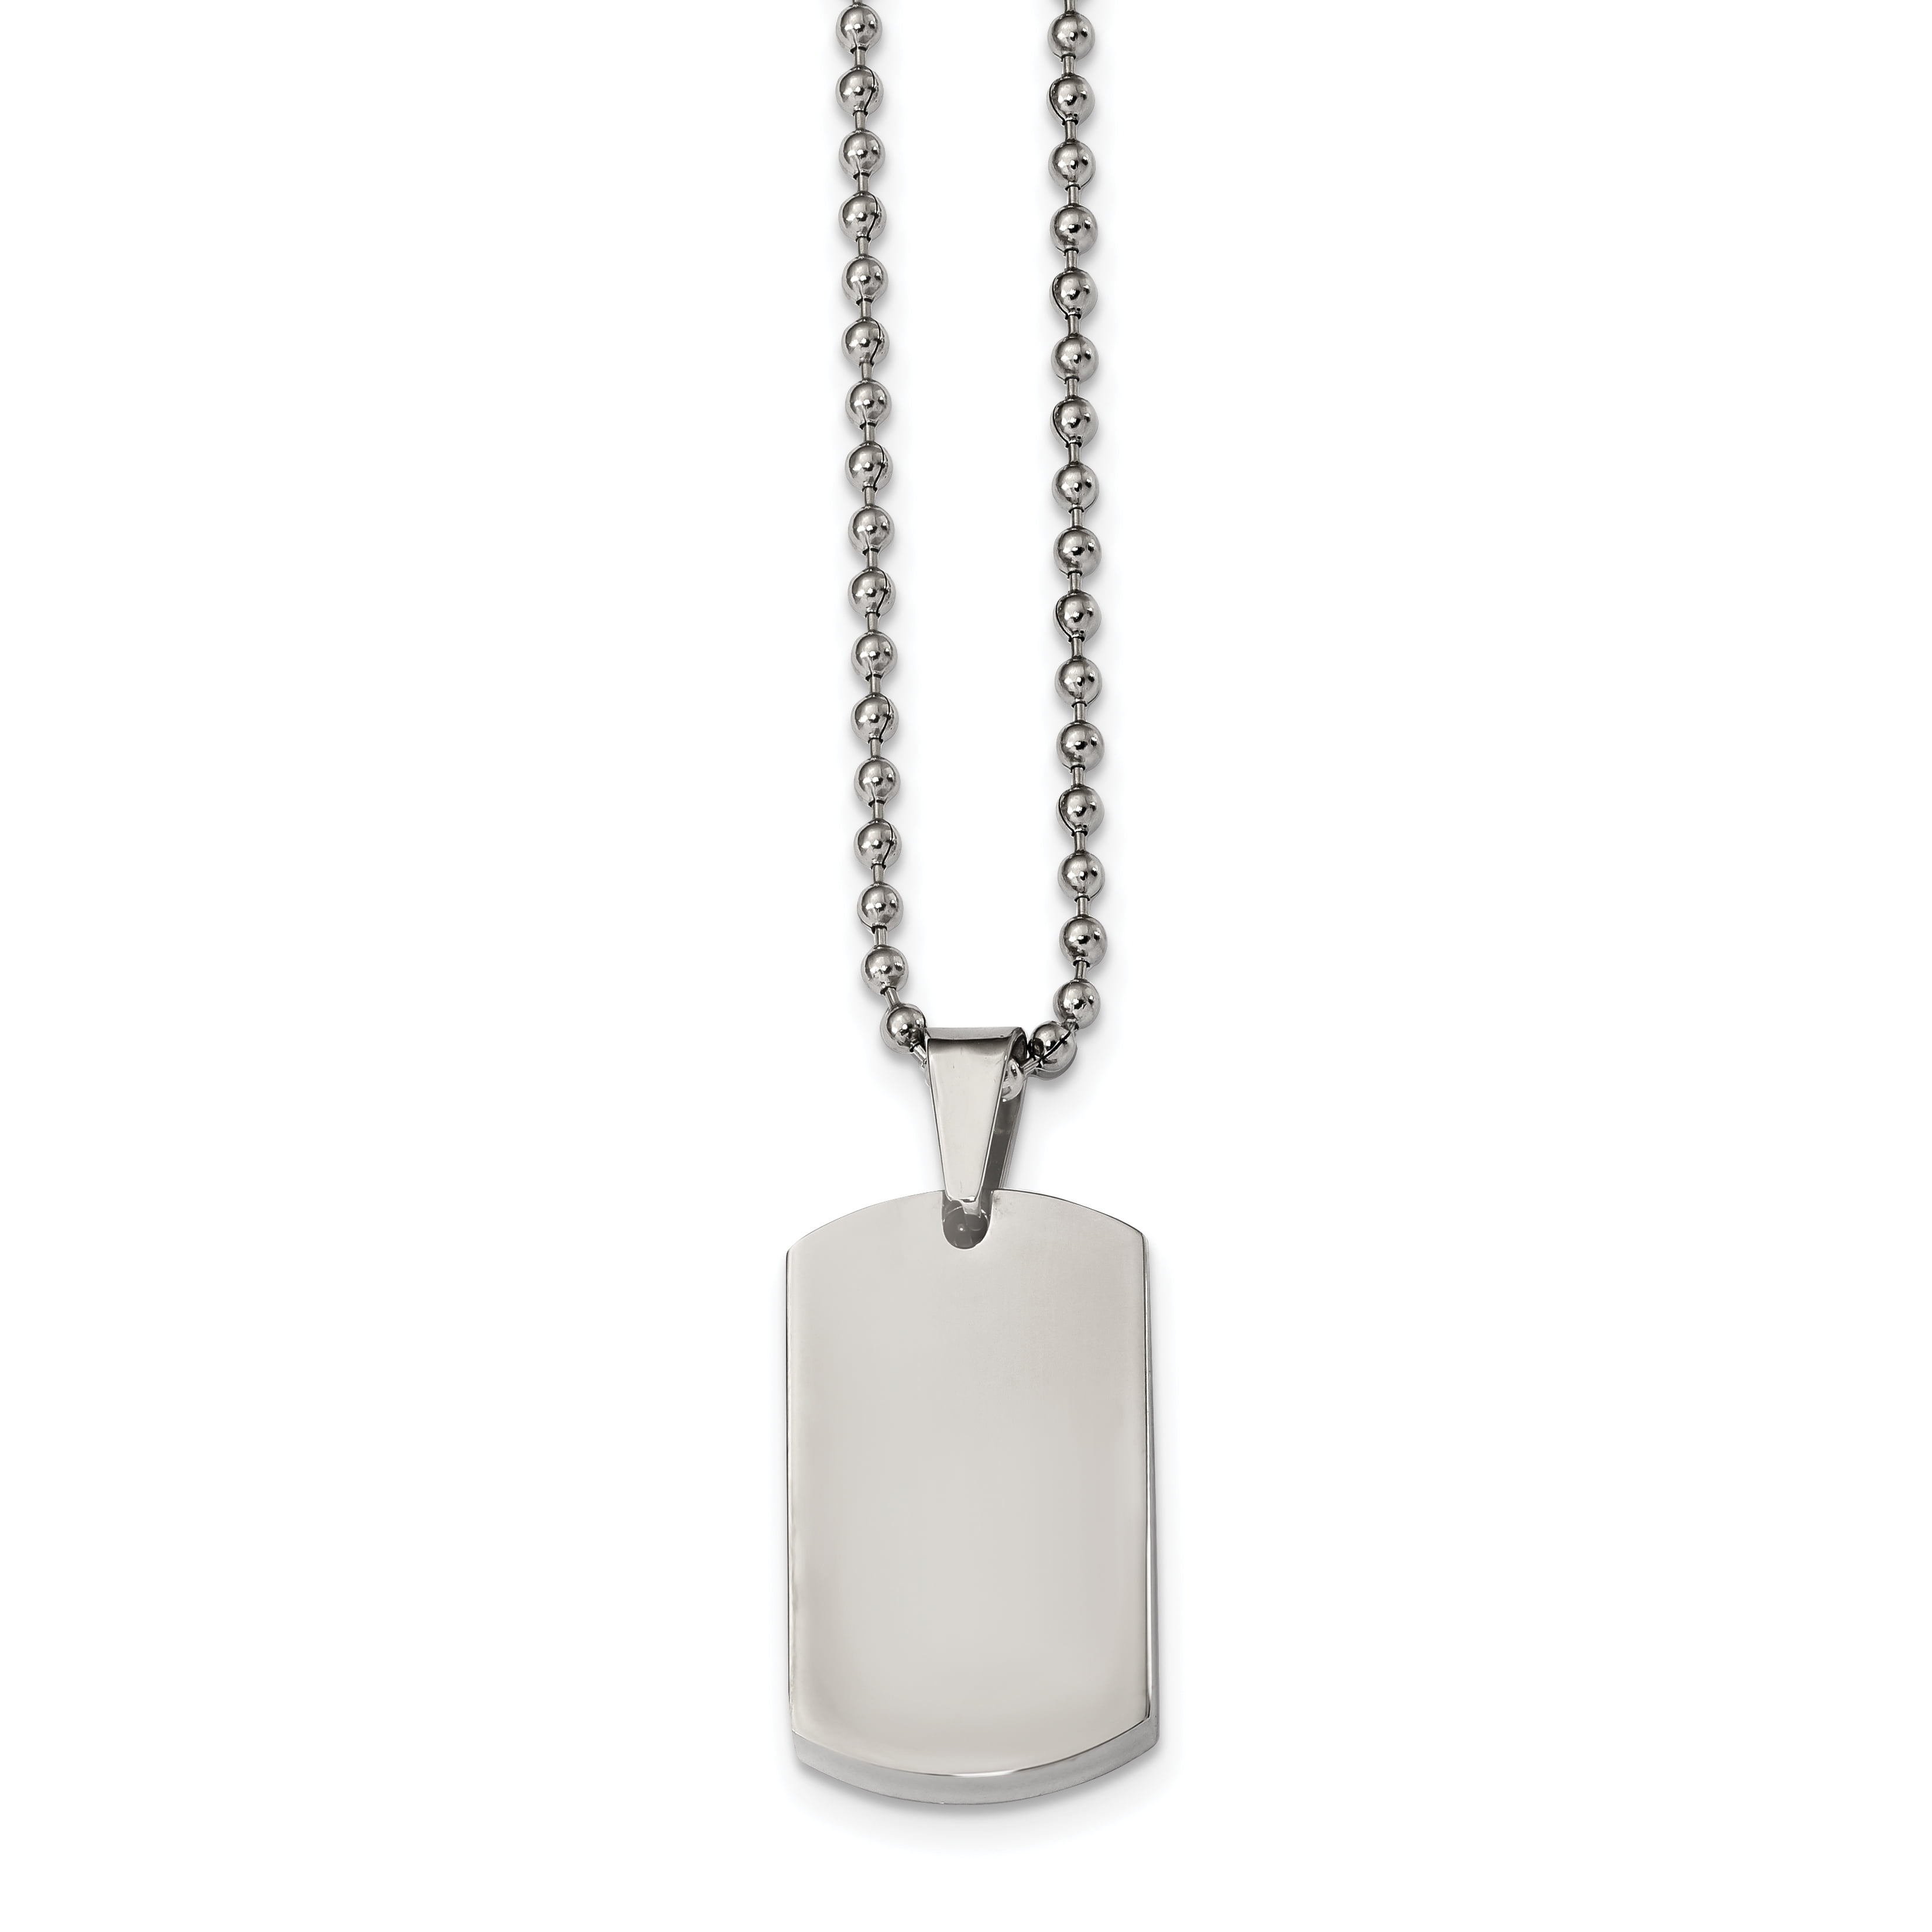 YUTIPGER Sublimation Blank Necklaces Metal Pendant Base with Clasp